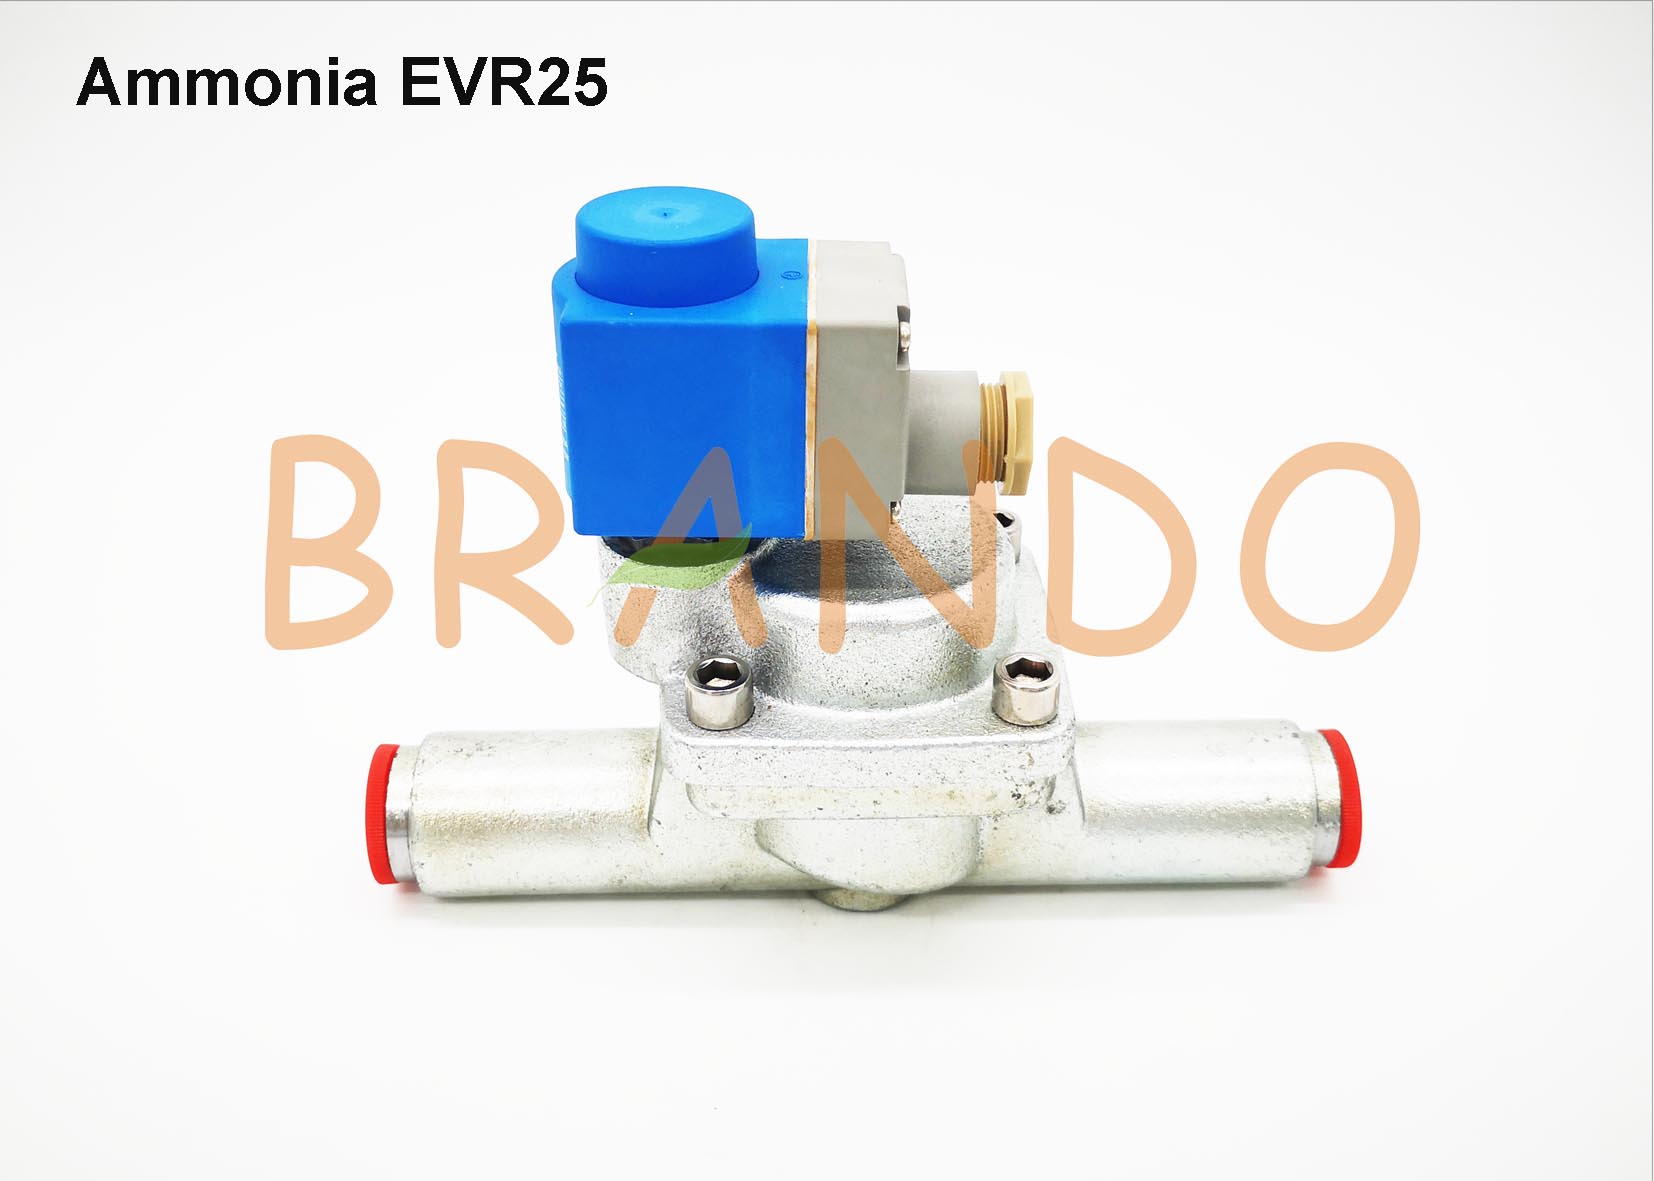 EVR25 ammonia cast iron body refrigeration solenoid valve in air cooling unit